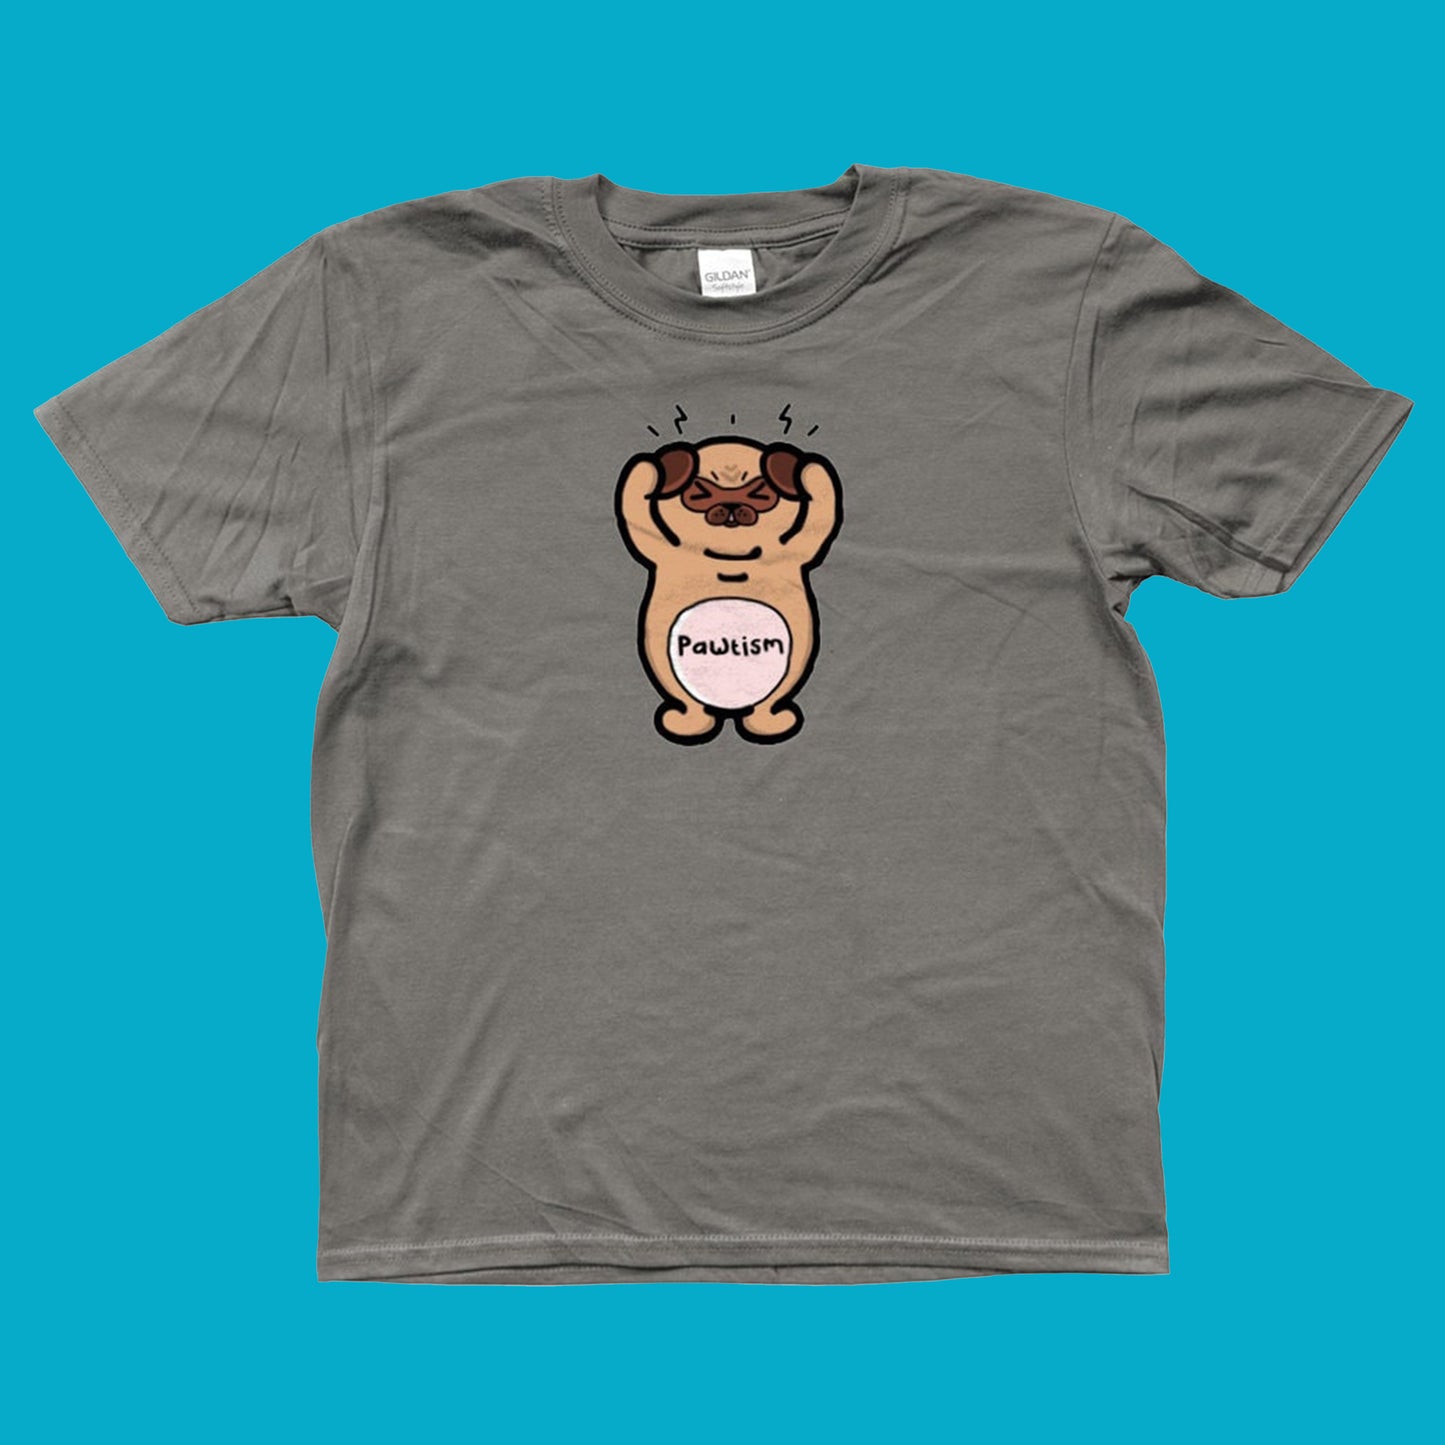 The Pawtism Dog Kids Tee - Autism on a blue background. The charcoal grey short sleeve tshirt features a stressed pug dog covering its ears with black lines coming from the top of its head, across its body in black text reads 'pawtism'. The hand drawn design is raising awareness for autism and neurodivergence.